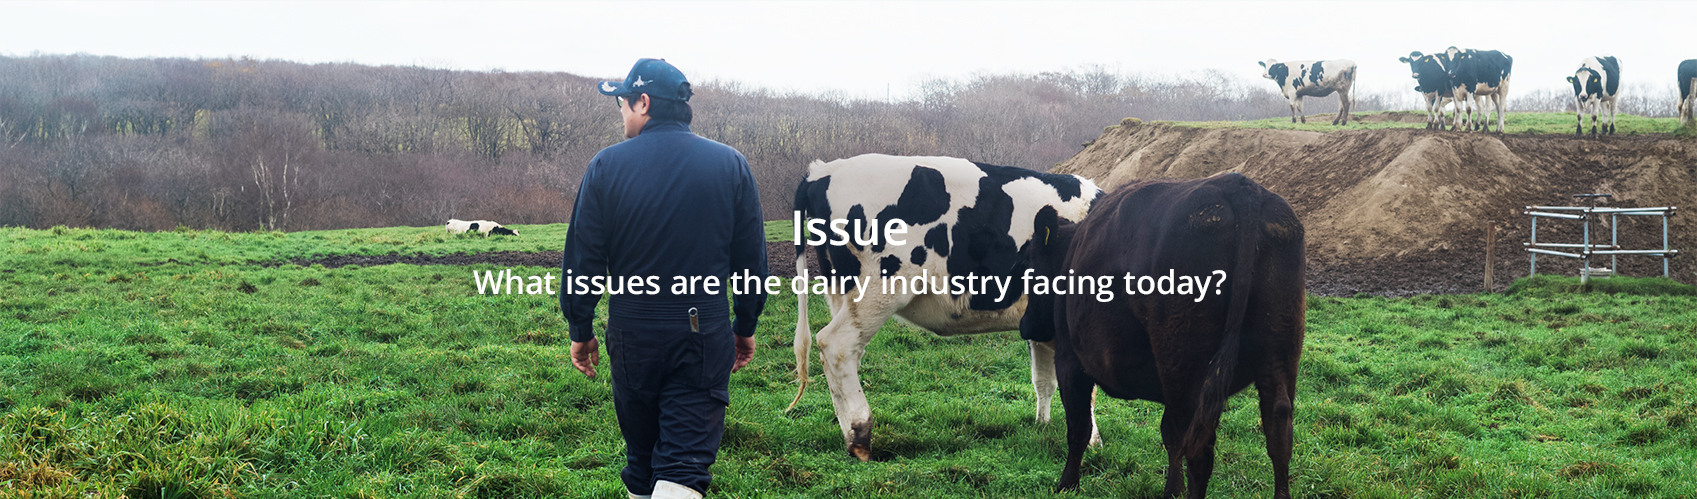 Issue What issues are the dairy industry facing today?